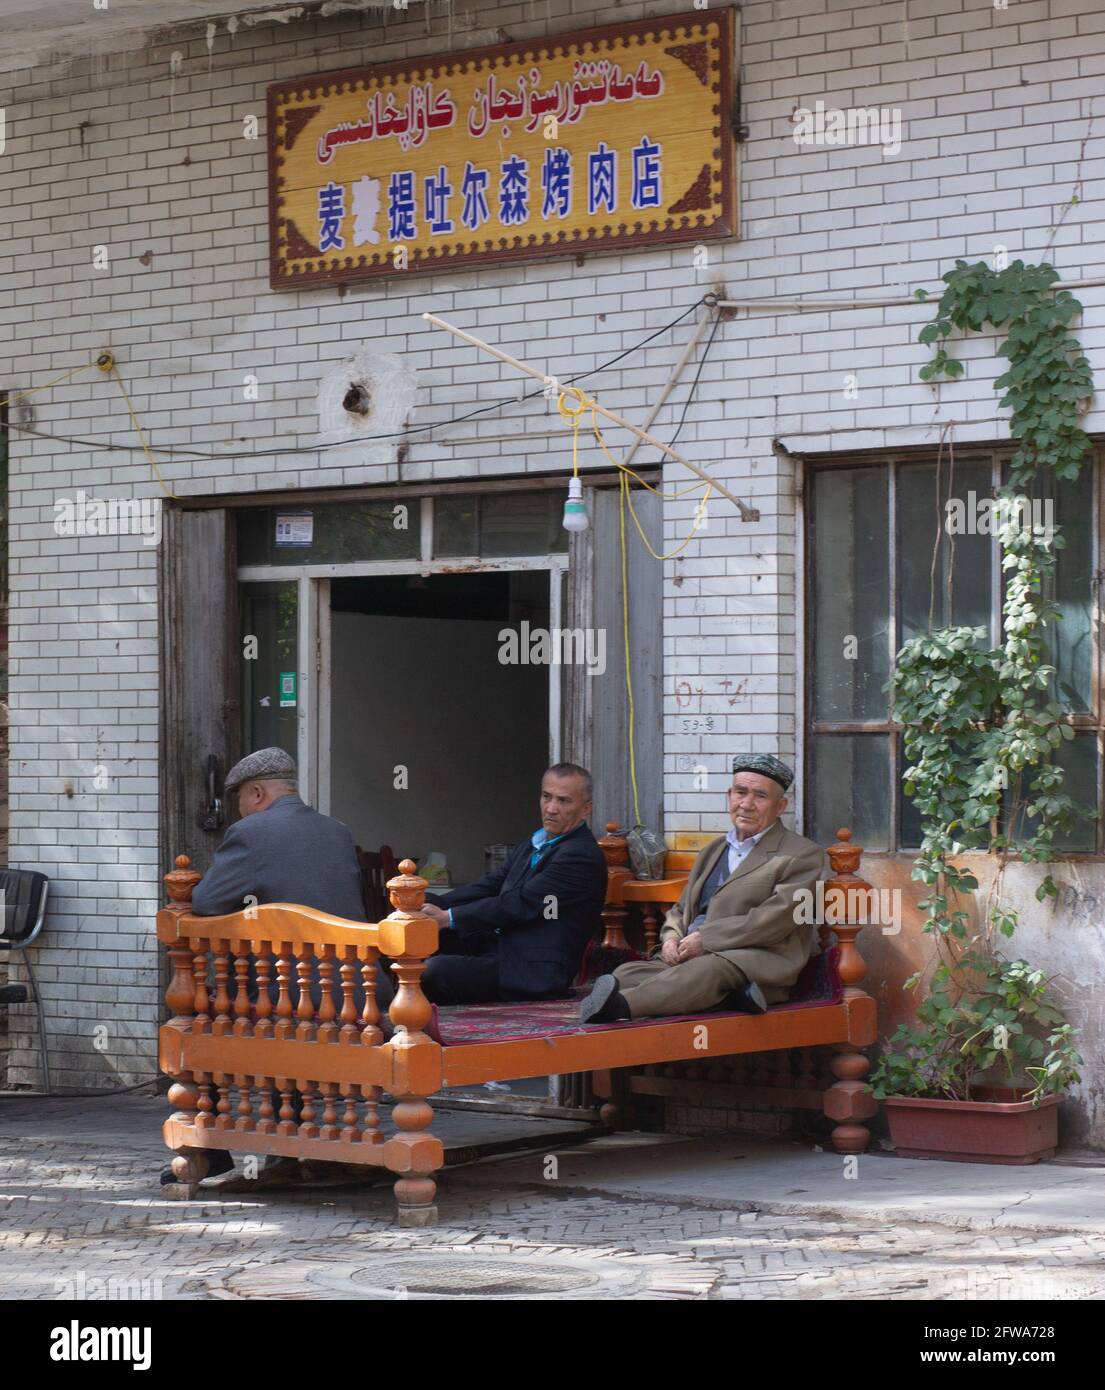 Three adult men sitting on a bed outside the tent Kashgar, Xinkiang, Popular Republic of China, 2019 Stock Photo